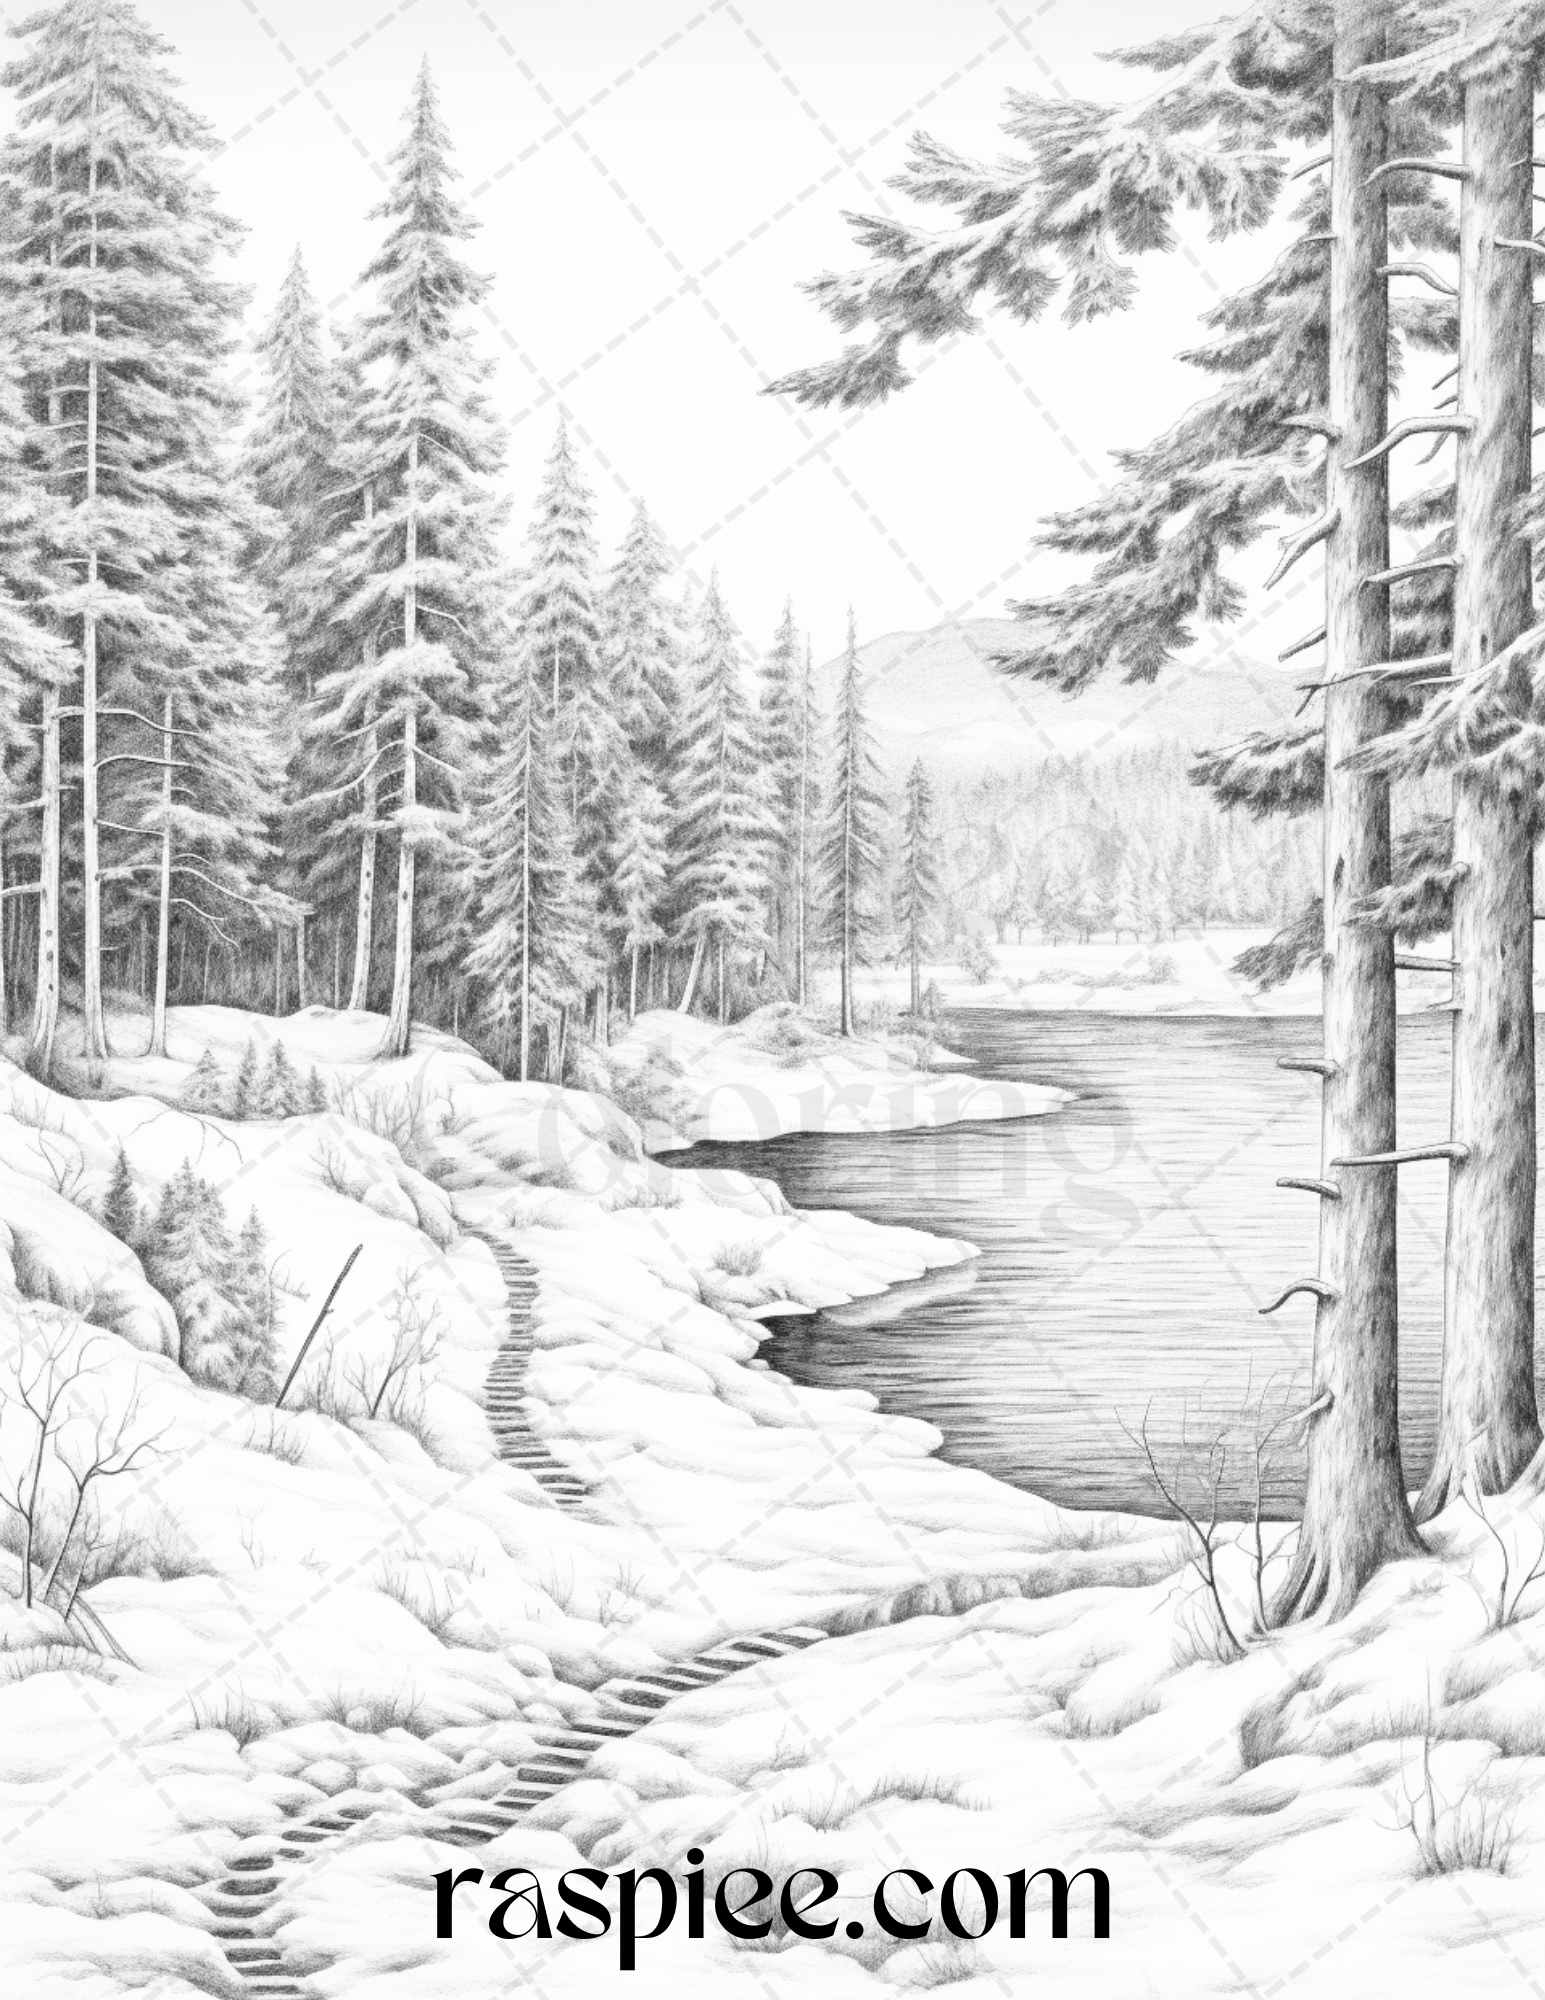 Winter Scenery Coloring Page, Grayscale Printable for Adults, Snowy Landscapes Coloring Book, Detailed Nature Scenes Artwork, Winter Relaxation Adult Coloring, Stress Relief Creative Hobby, Mindful Coloring Digital Download